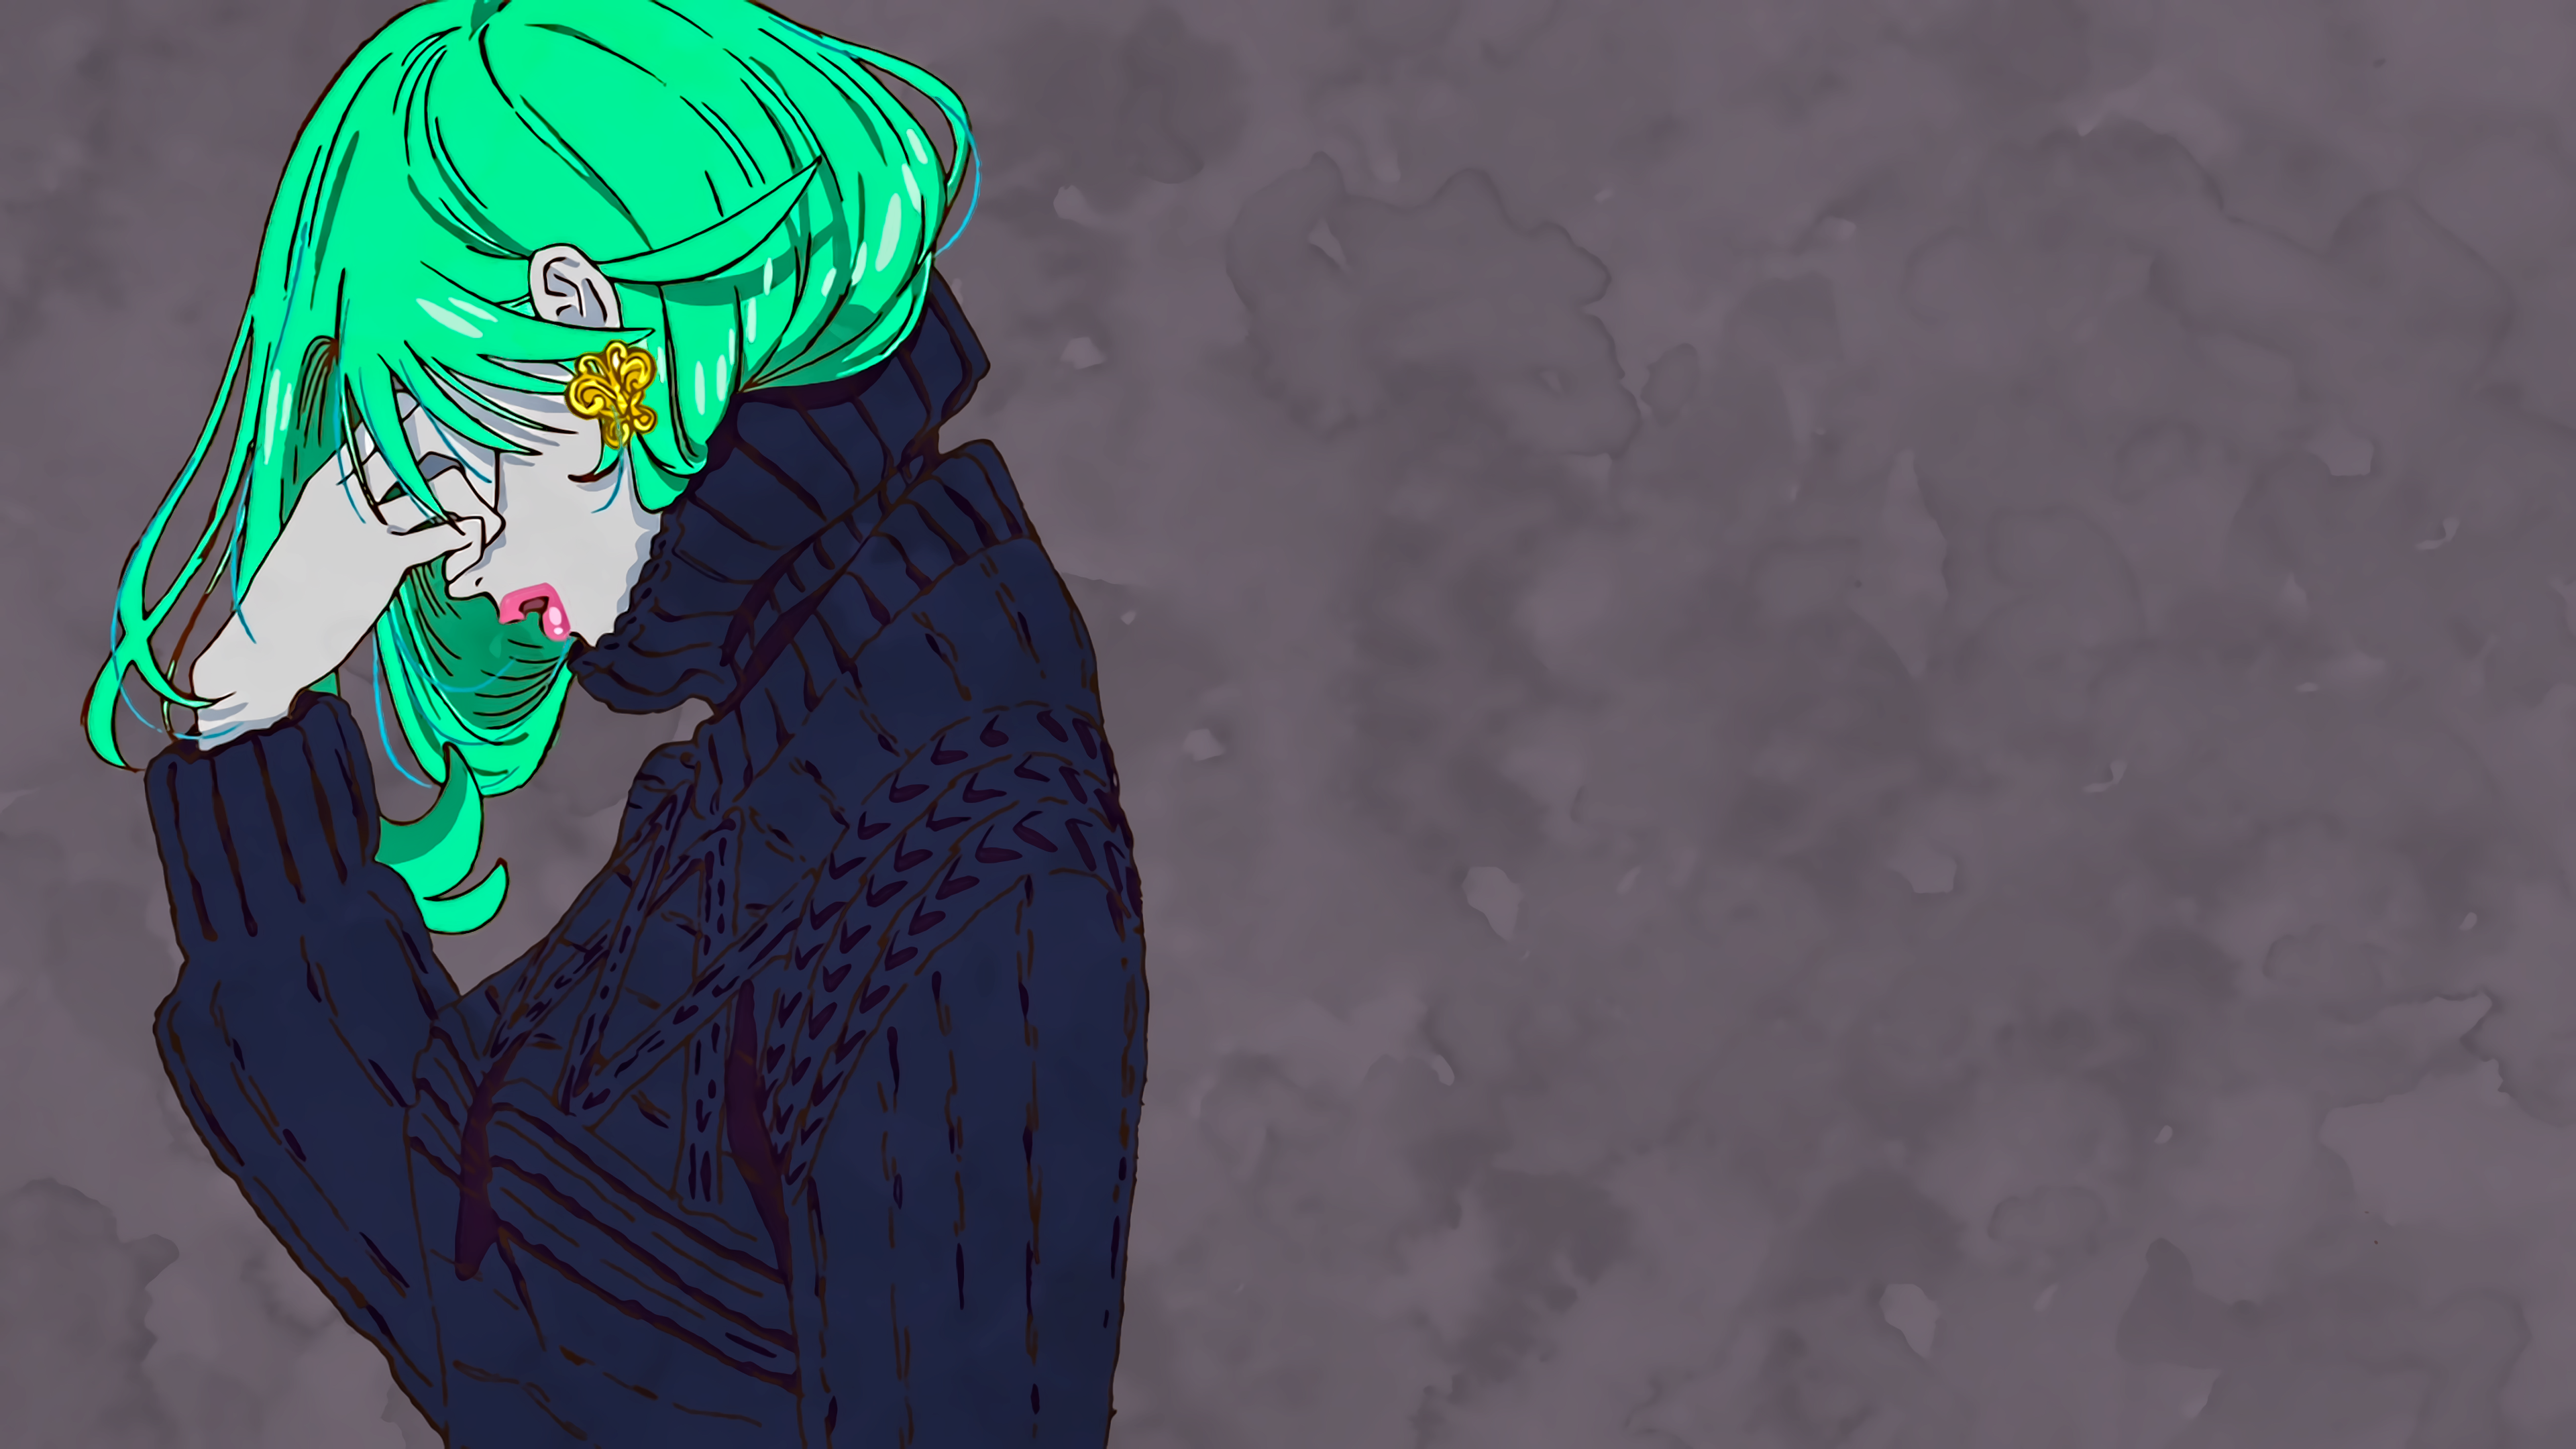 Anime 3840x2160 Punch Line anime anime girls pink lipstick green hair face palm gray background gold pale women DeviantArt hair in face sweater blue sweater blue clothing hand on face